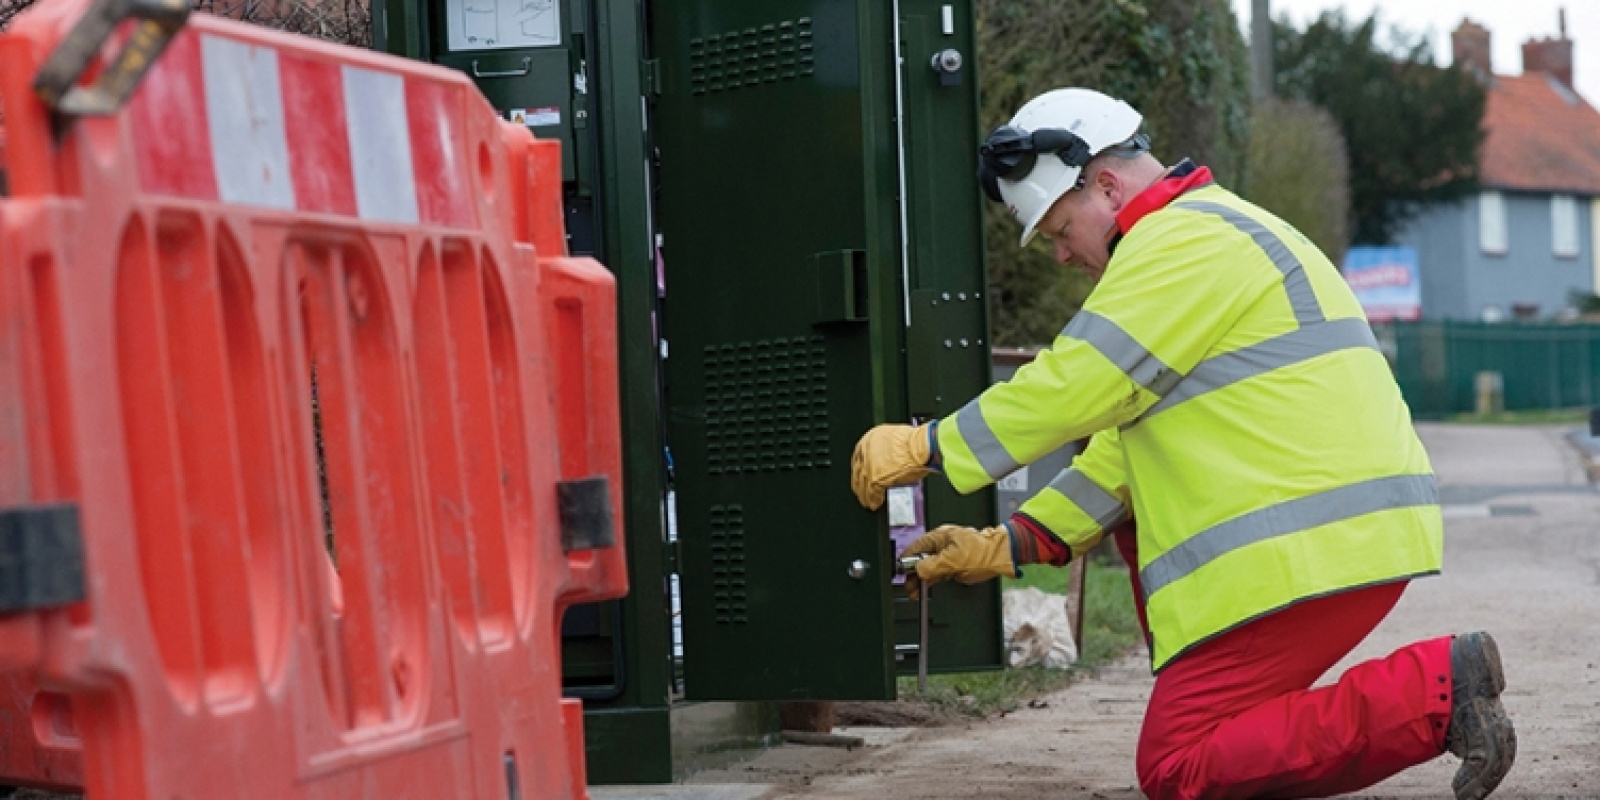 Morrison Telecom Services Secures Framework Agreement with Openreach